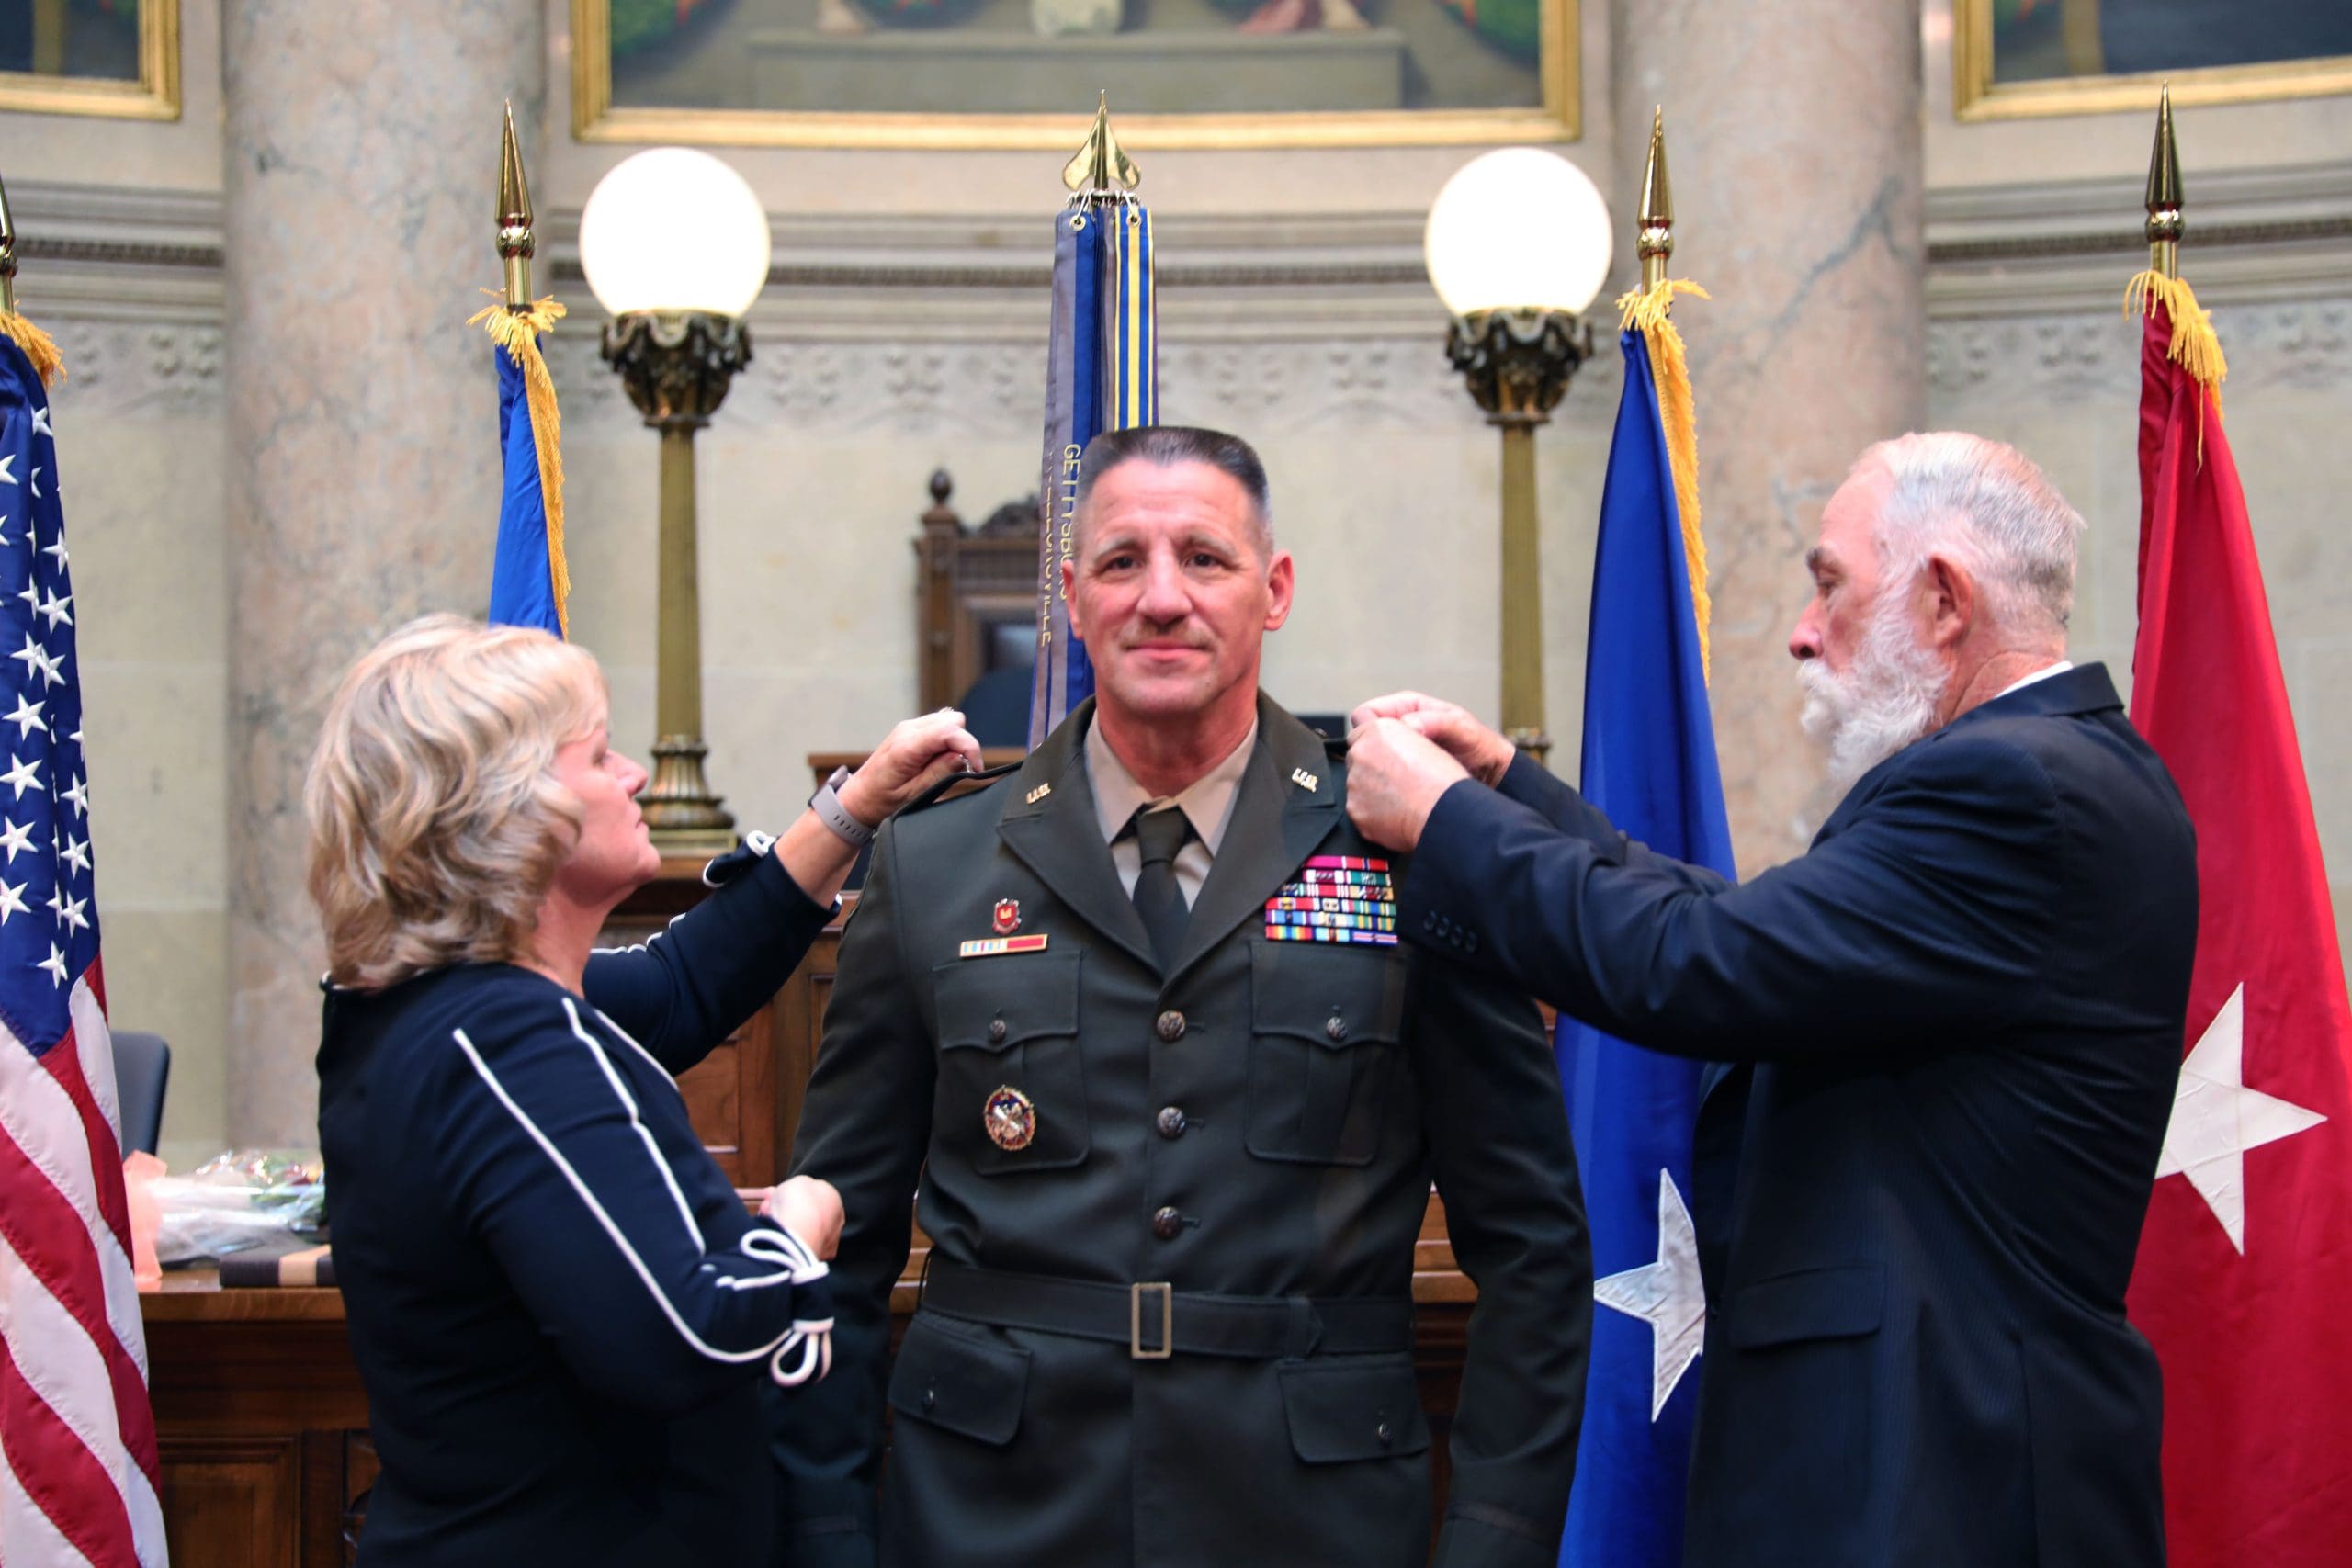 Col. Pulvermacher is pinned with his new rank of Brig. Gen. by his wife, Doris, and his first active duty squad leader, Sgt. 1st Class Retired Robert “Sam” Nation during a Sept. 24 ceremony at the Wisconsin State Capitol in Madison, Wis. Pulvermacher was promoted to brigadier general and will assume the role of Deputy Director of Acquisitions for the National Guard Bureau.